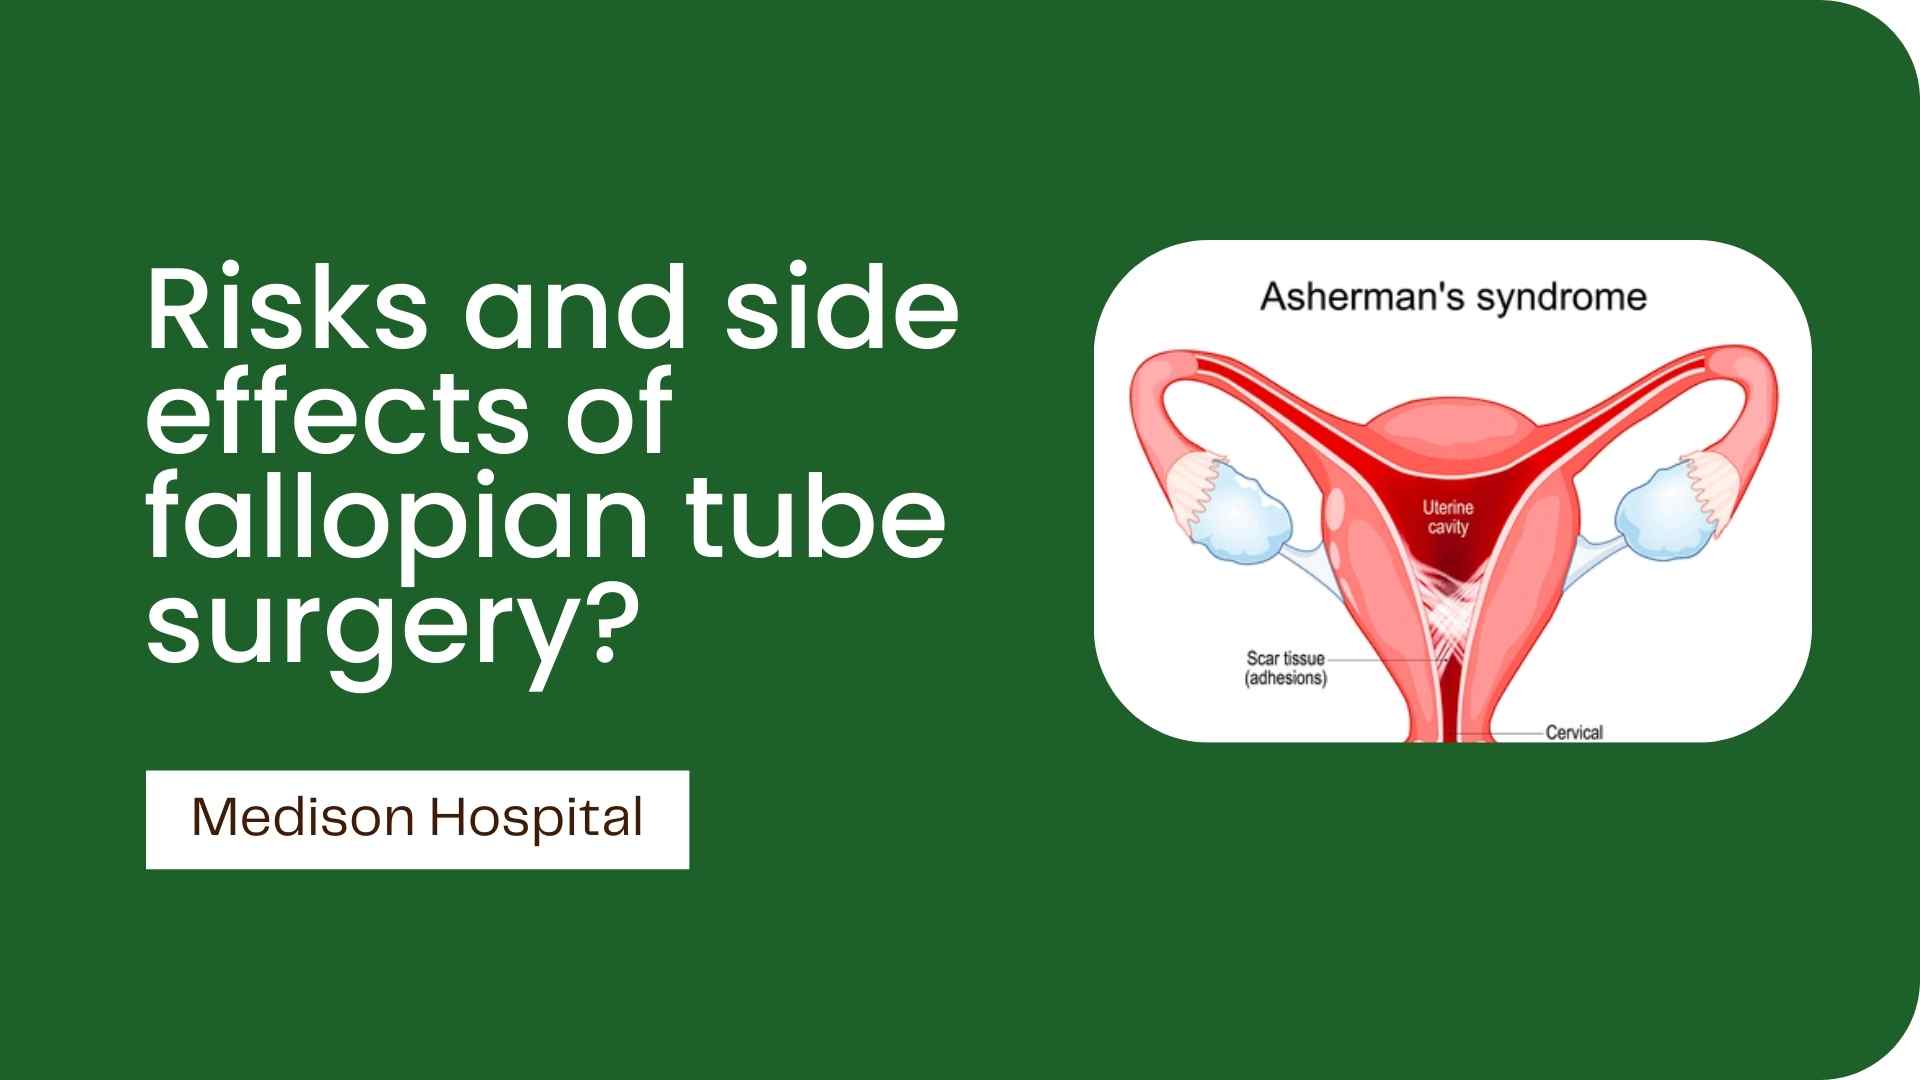 Risks and side effects of fallopian tube surgery?